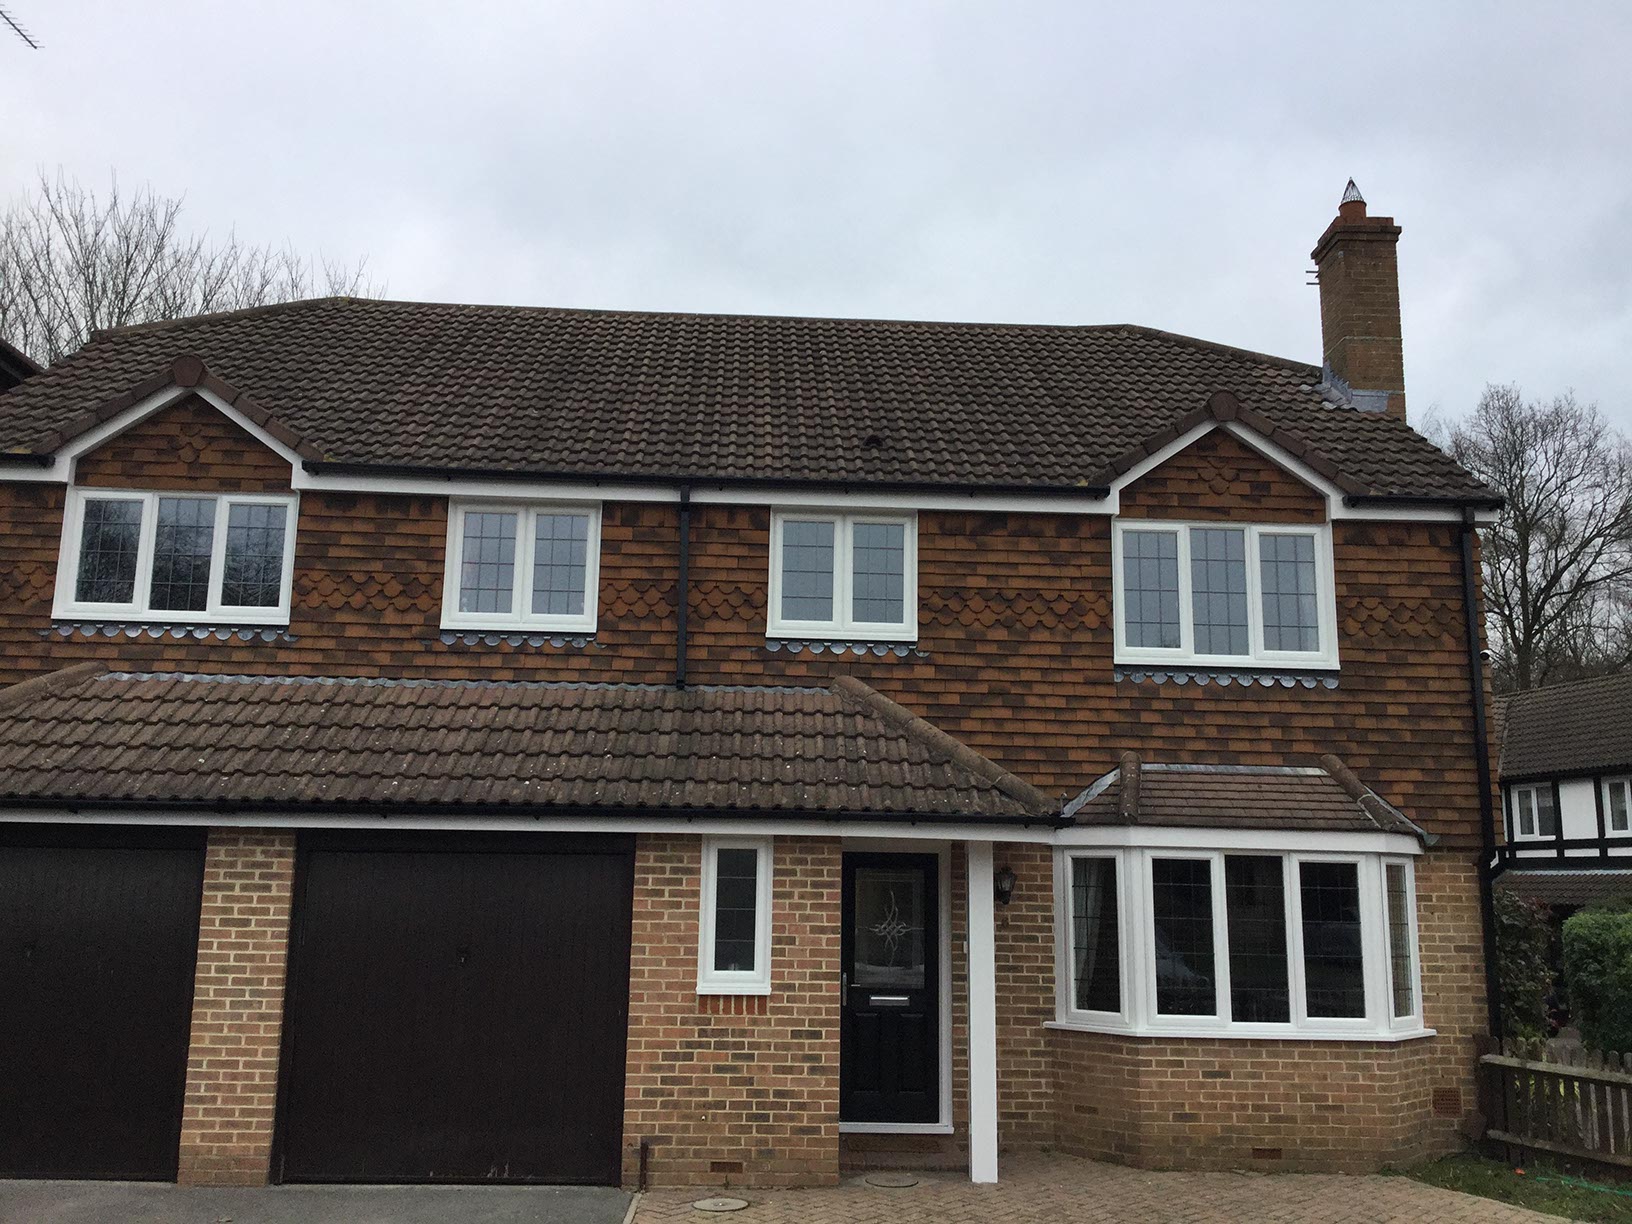 Triple Glazed Windows and Doors with Square Leads installed in Crawley, West Sussex